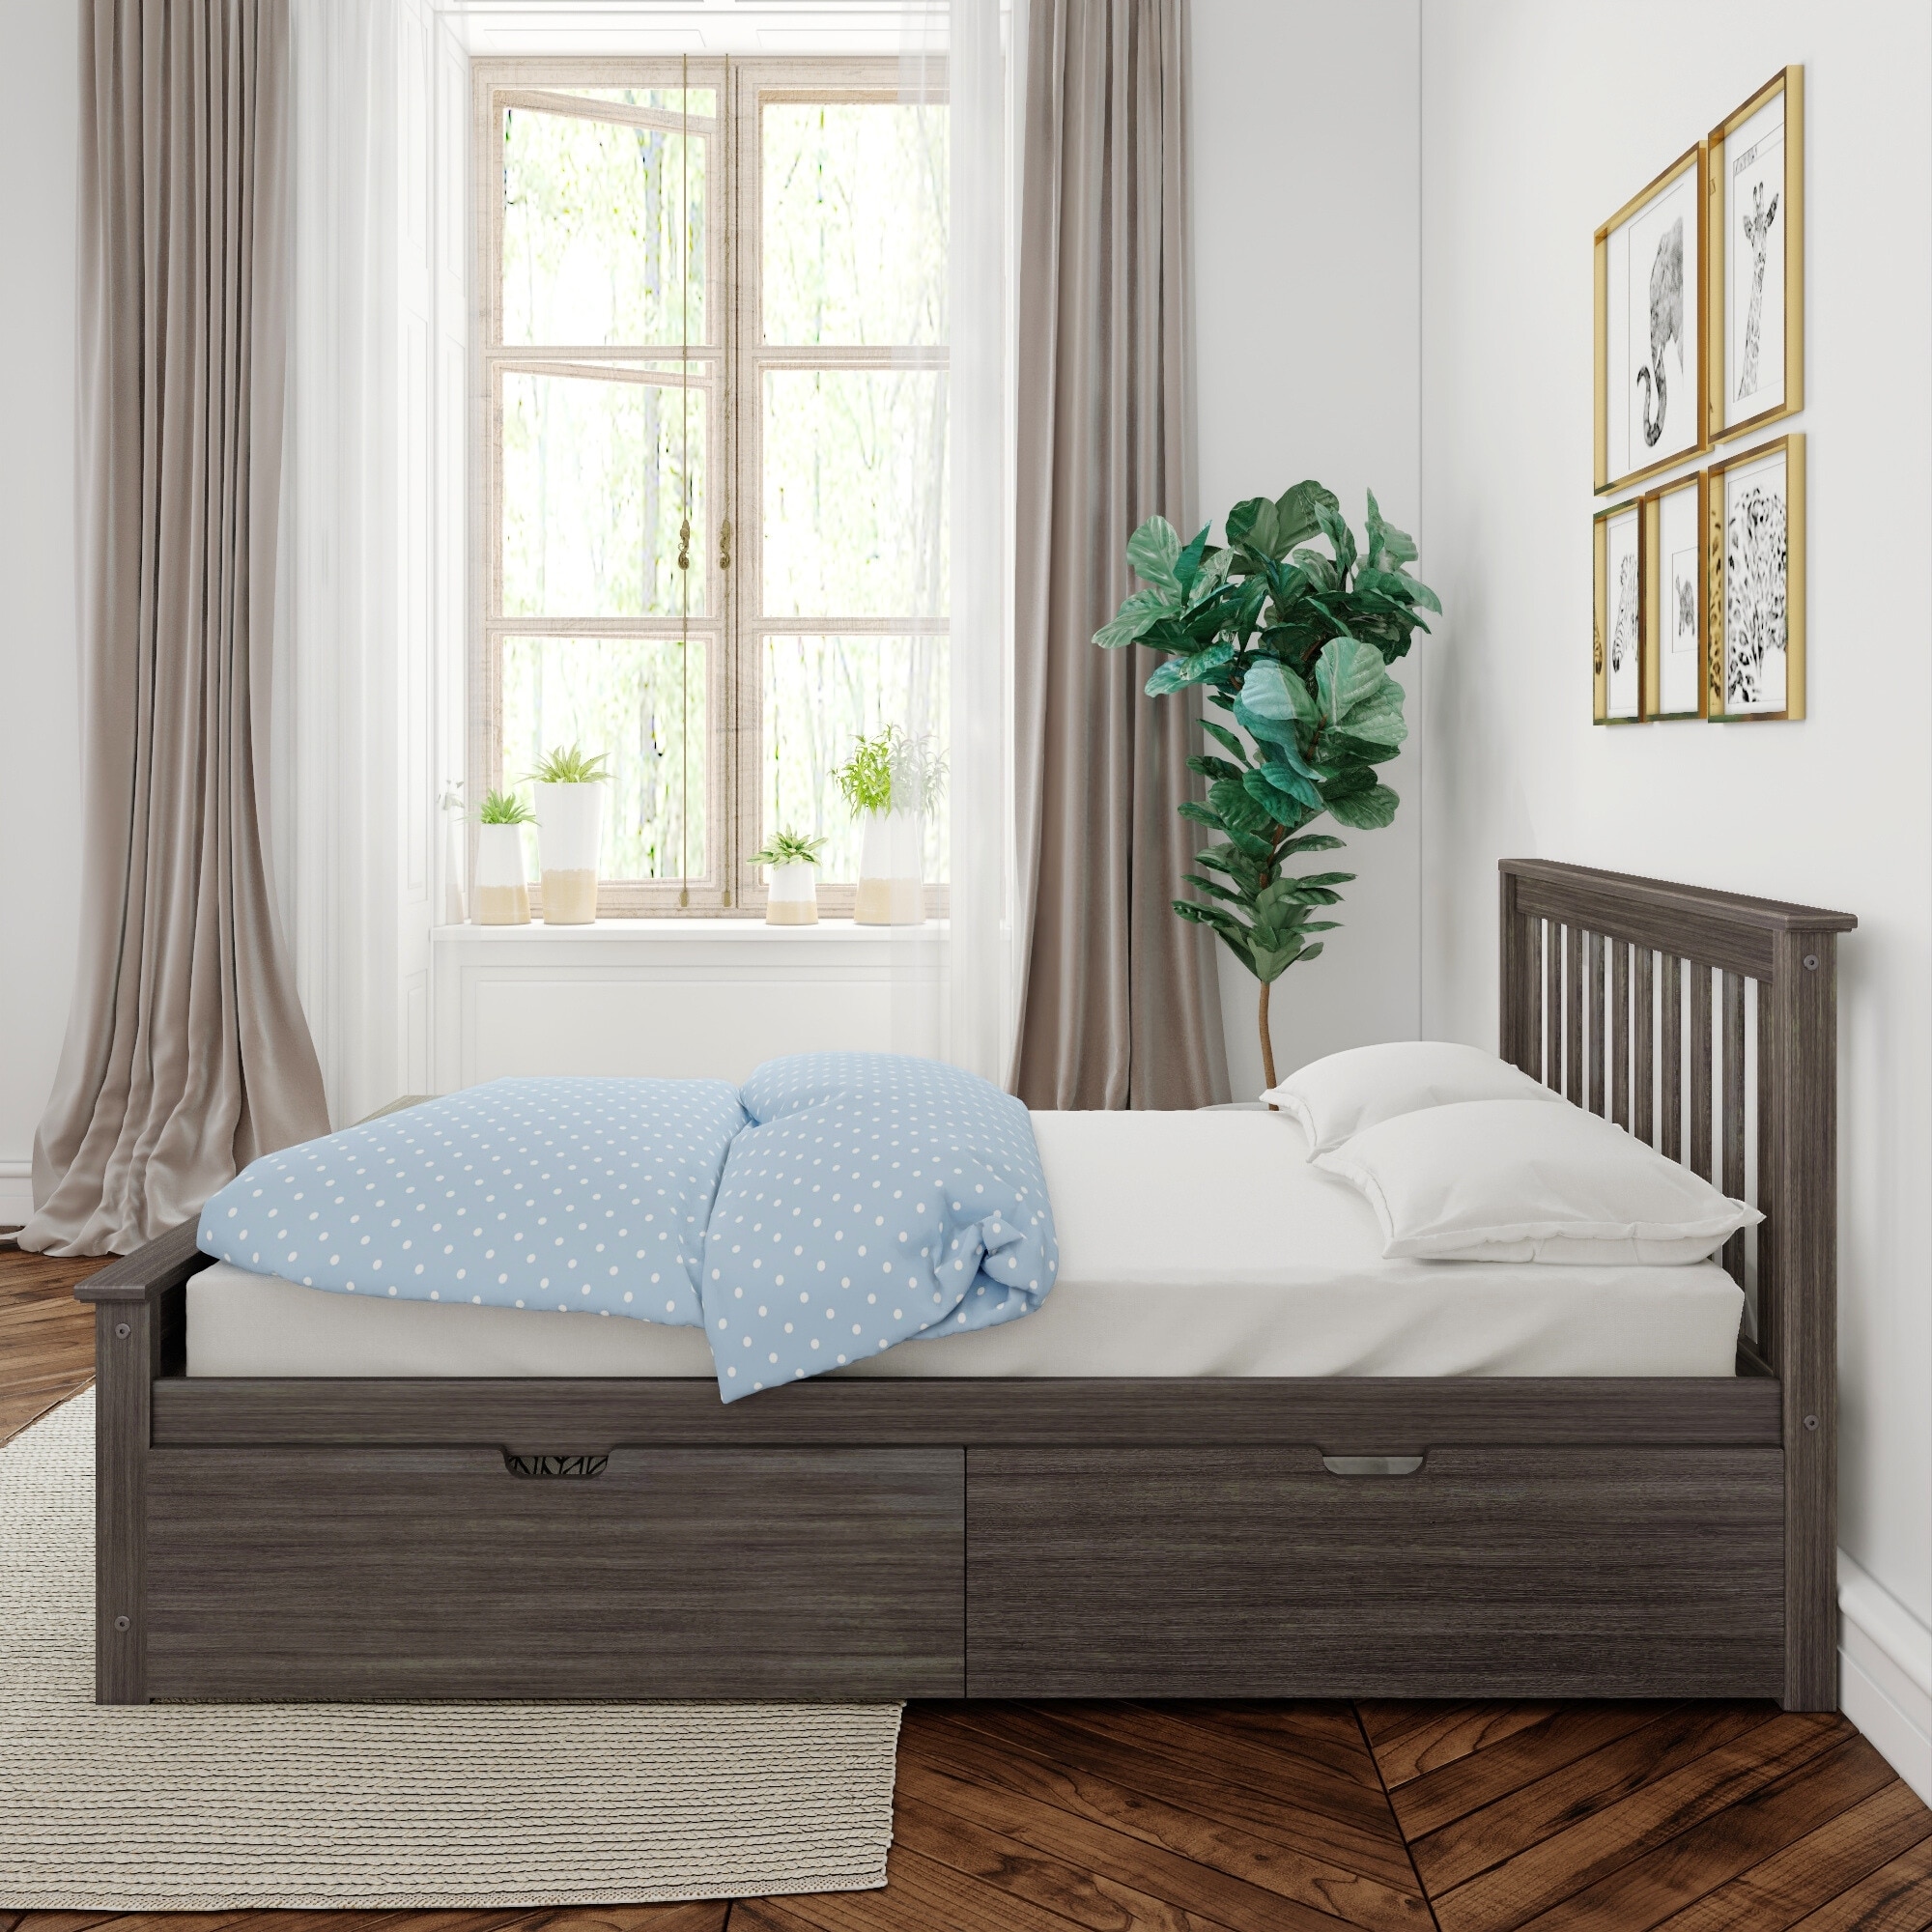 https://ak1.ostkcdn.com/images/products/is/images/direct/a5209b1071b55c1fe81eab5ea8589f54ccfbd612/Max-and-Lily-Full-Bed-with-Under-Bed-Storage-Drawers.jpg